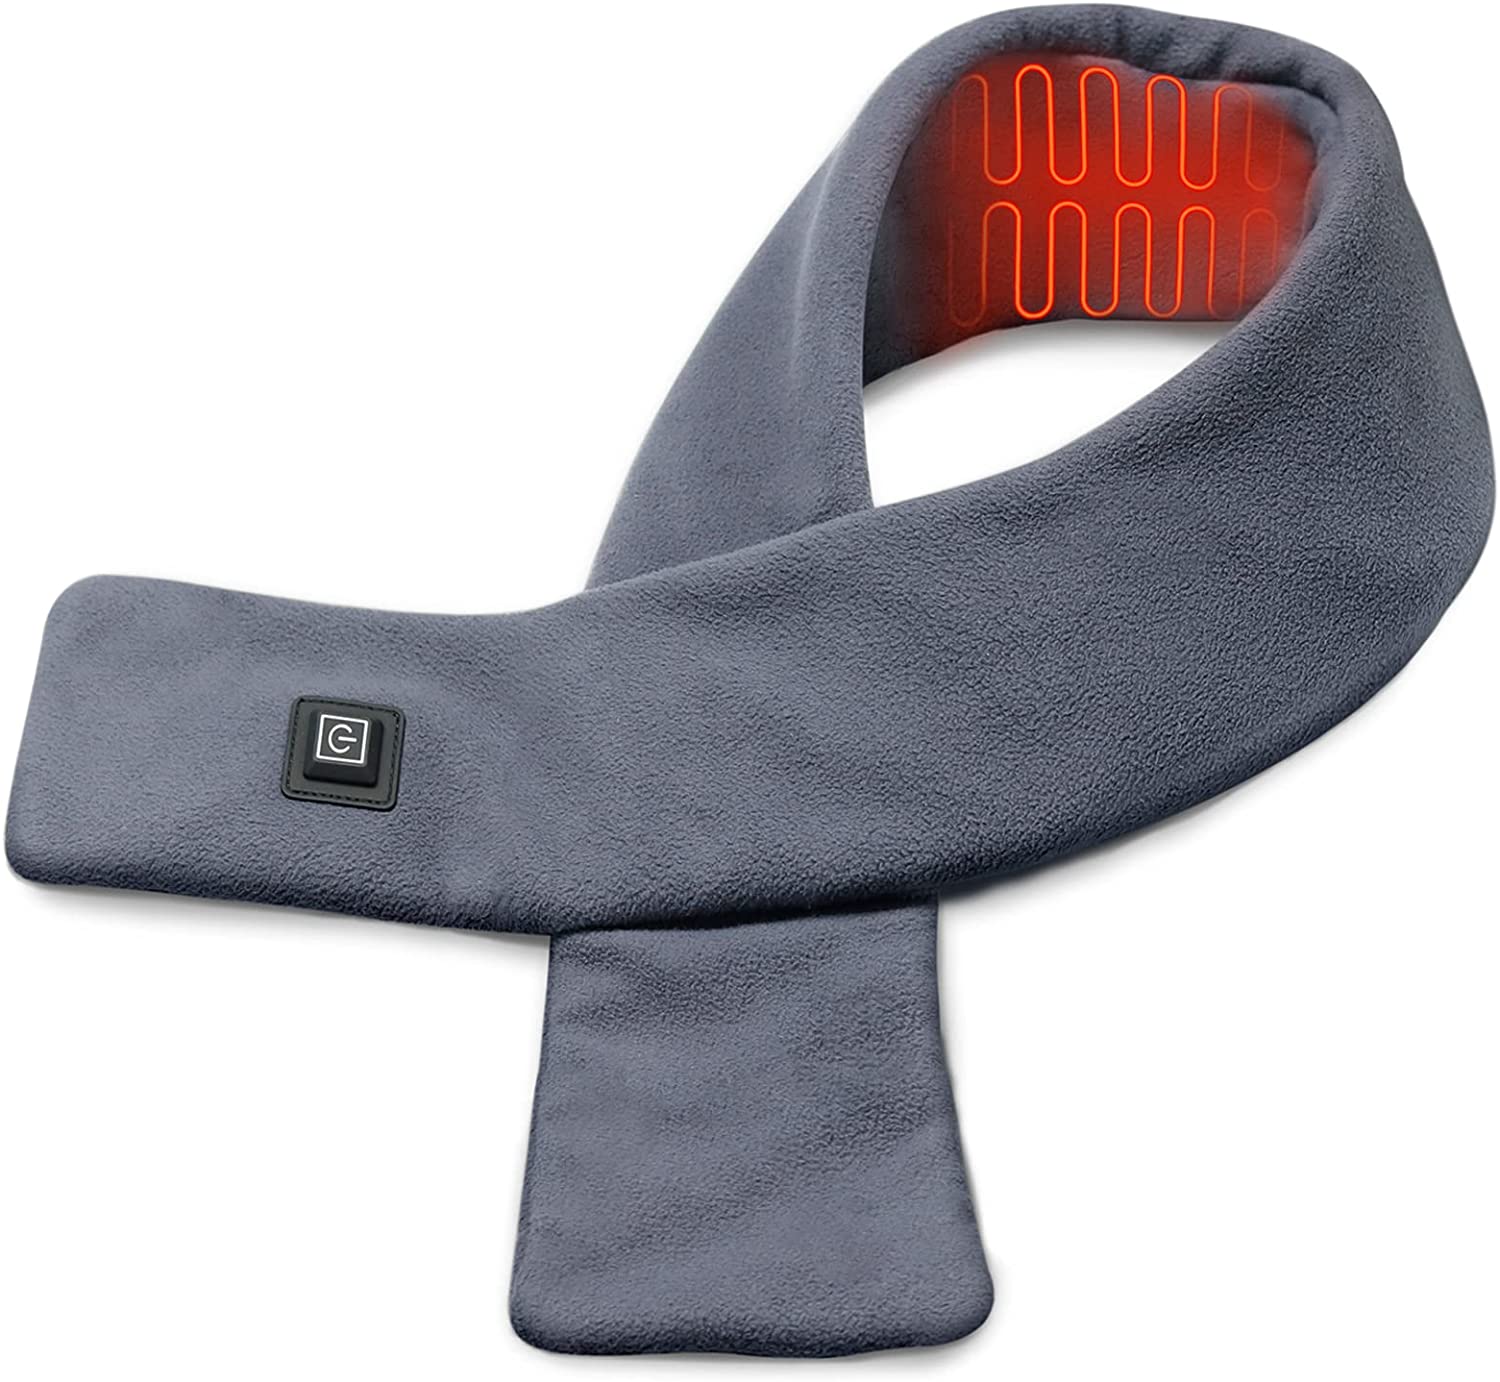 What You Need to Know About Infrared Neck Heating Pad 2